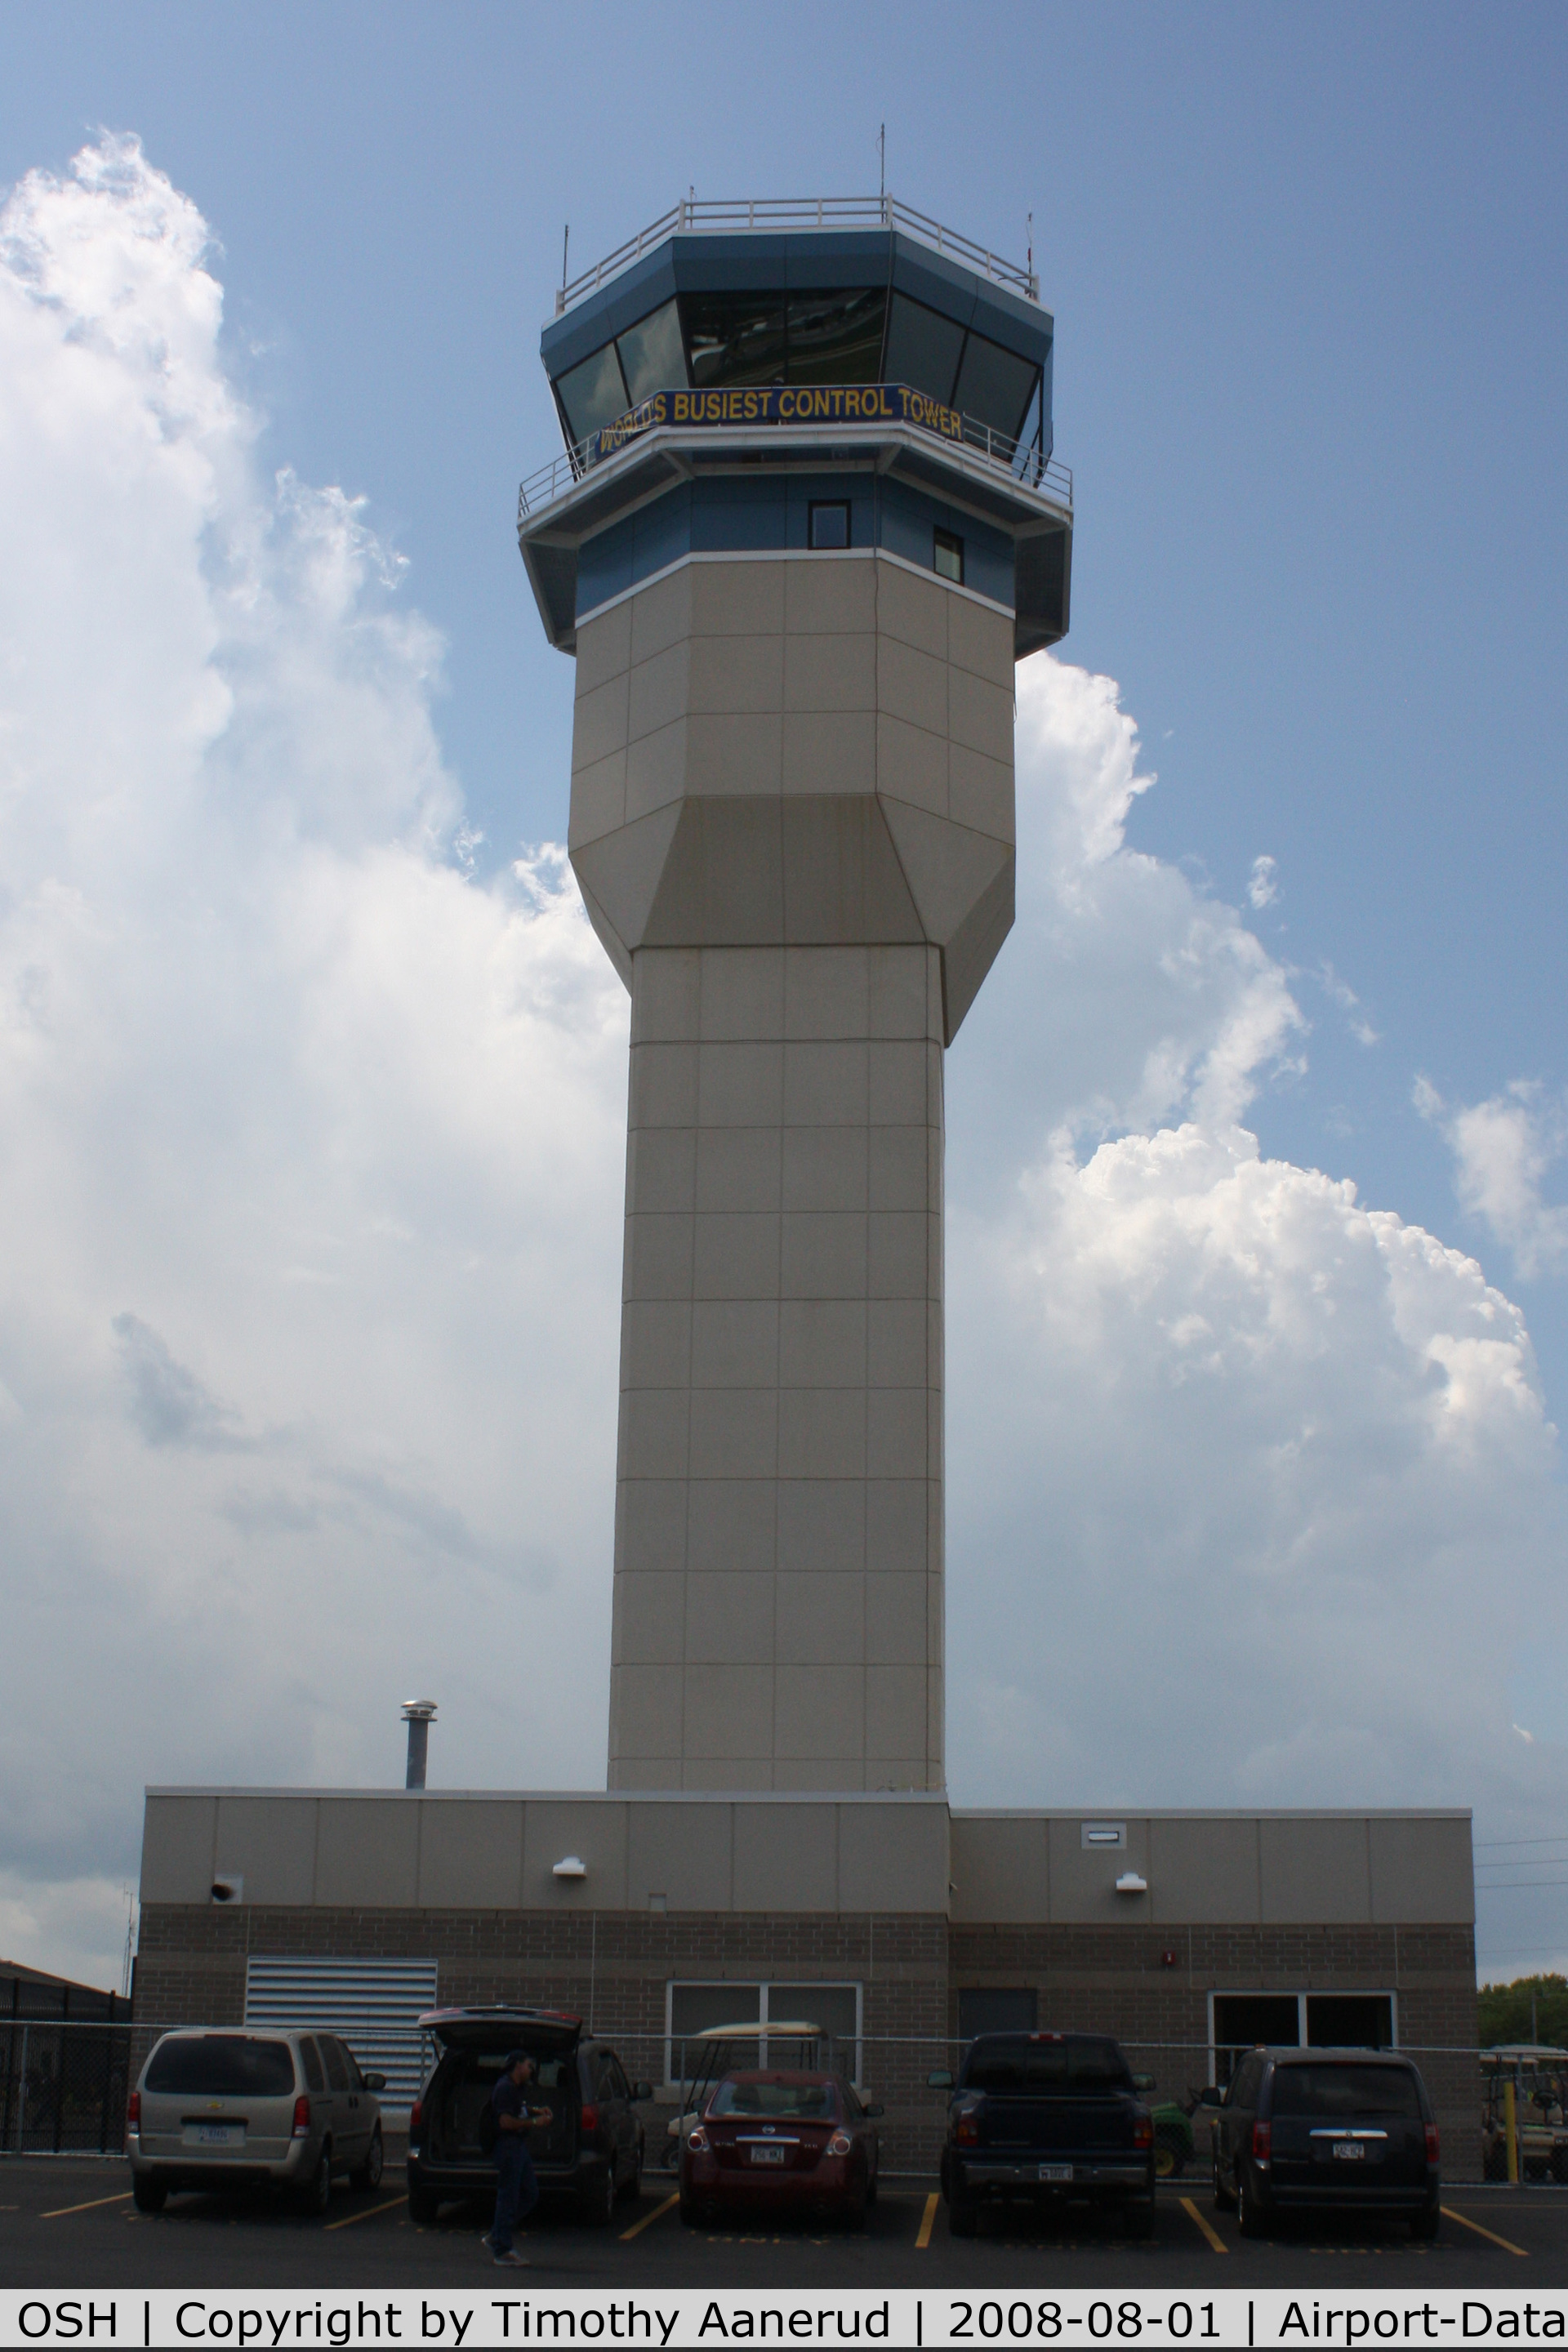 Wittman Regional Airport (OSH) - EAA AirVenture 2008, the new control tower. It won't be the great meeting place the old tower was.